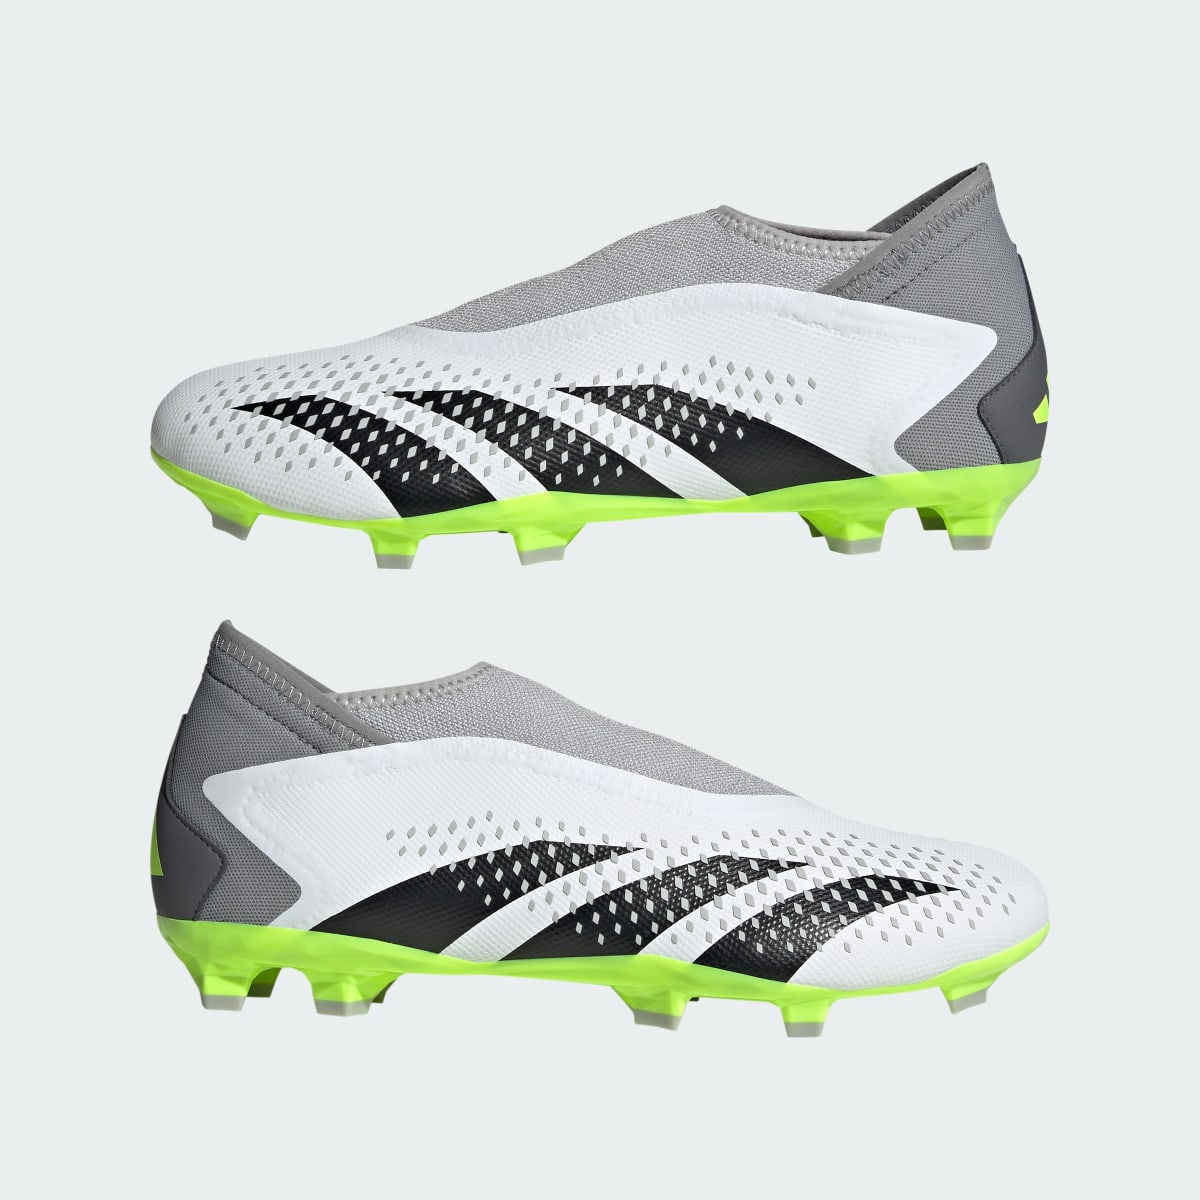 Adidas Predator Accuracy.3 Laceless Firm Ground Soccer Cleats. 8